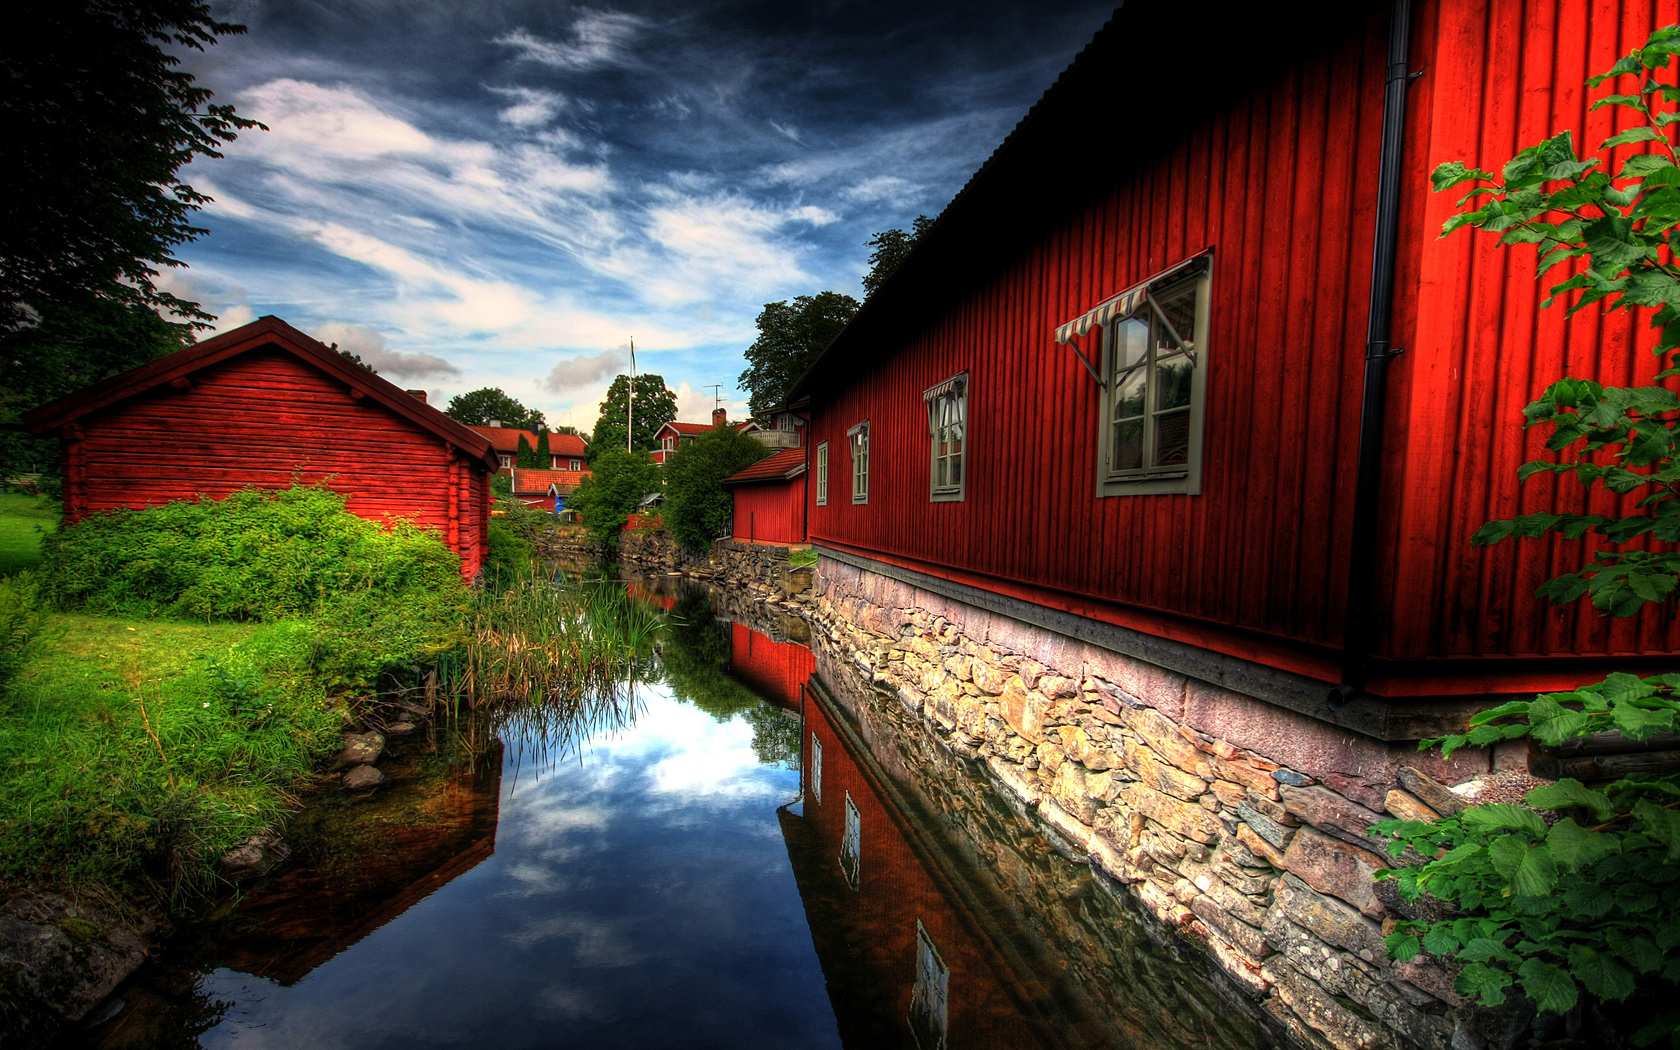 General 1680x1050 red canal building colorful outdoors plants